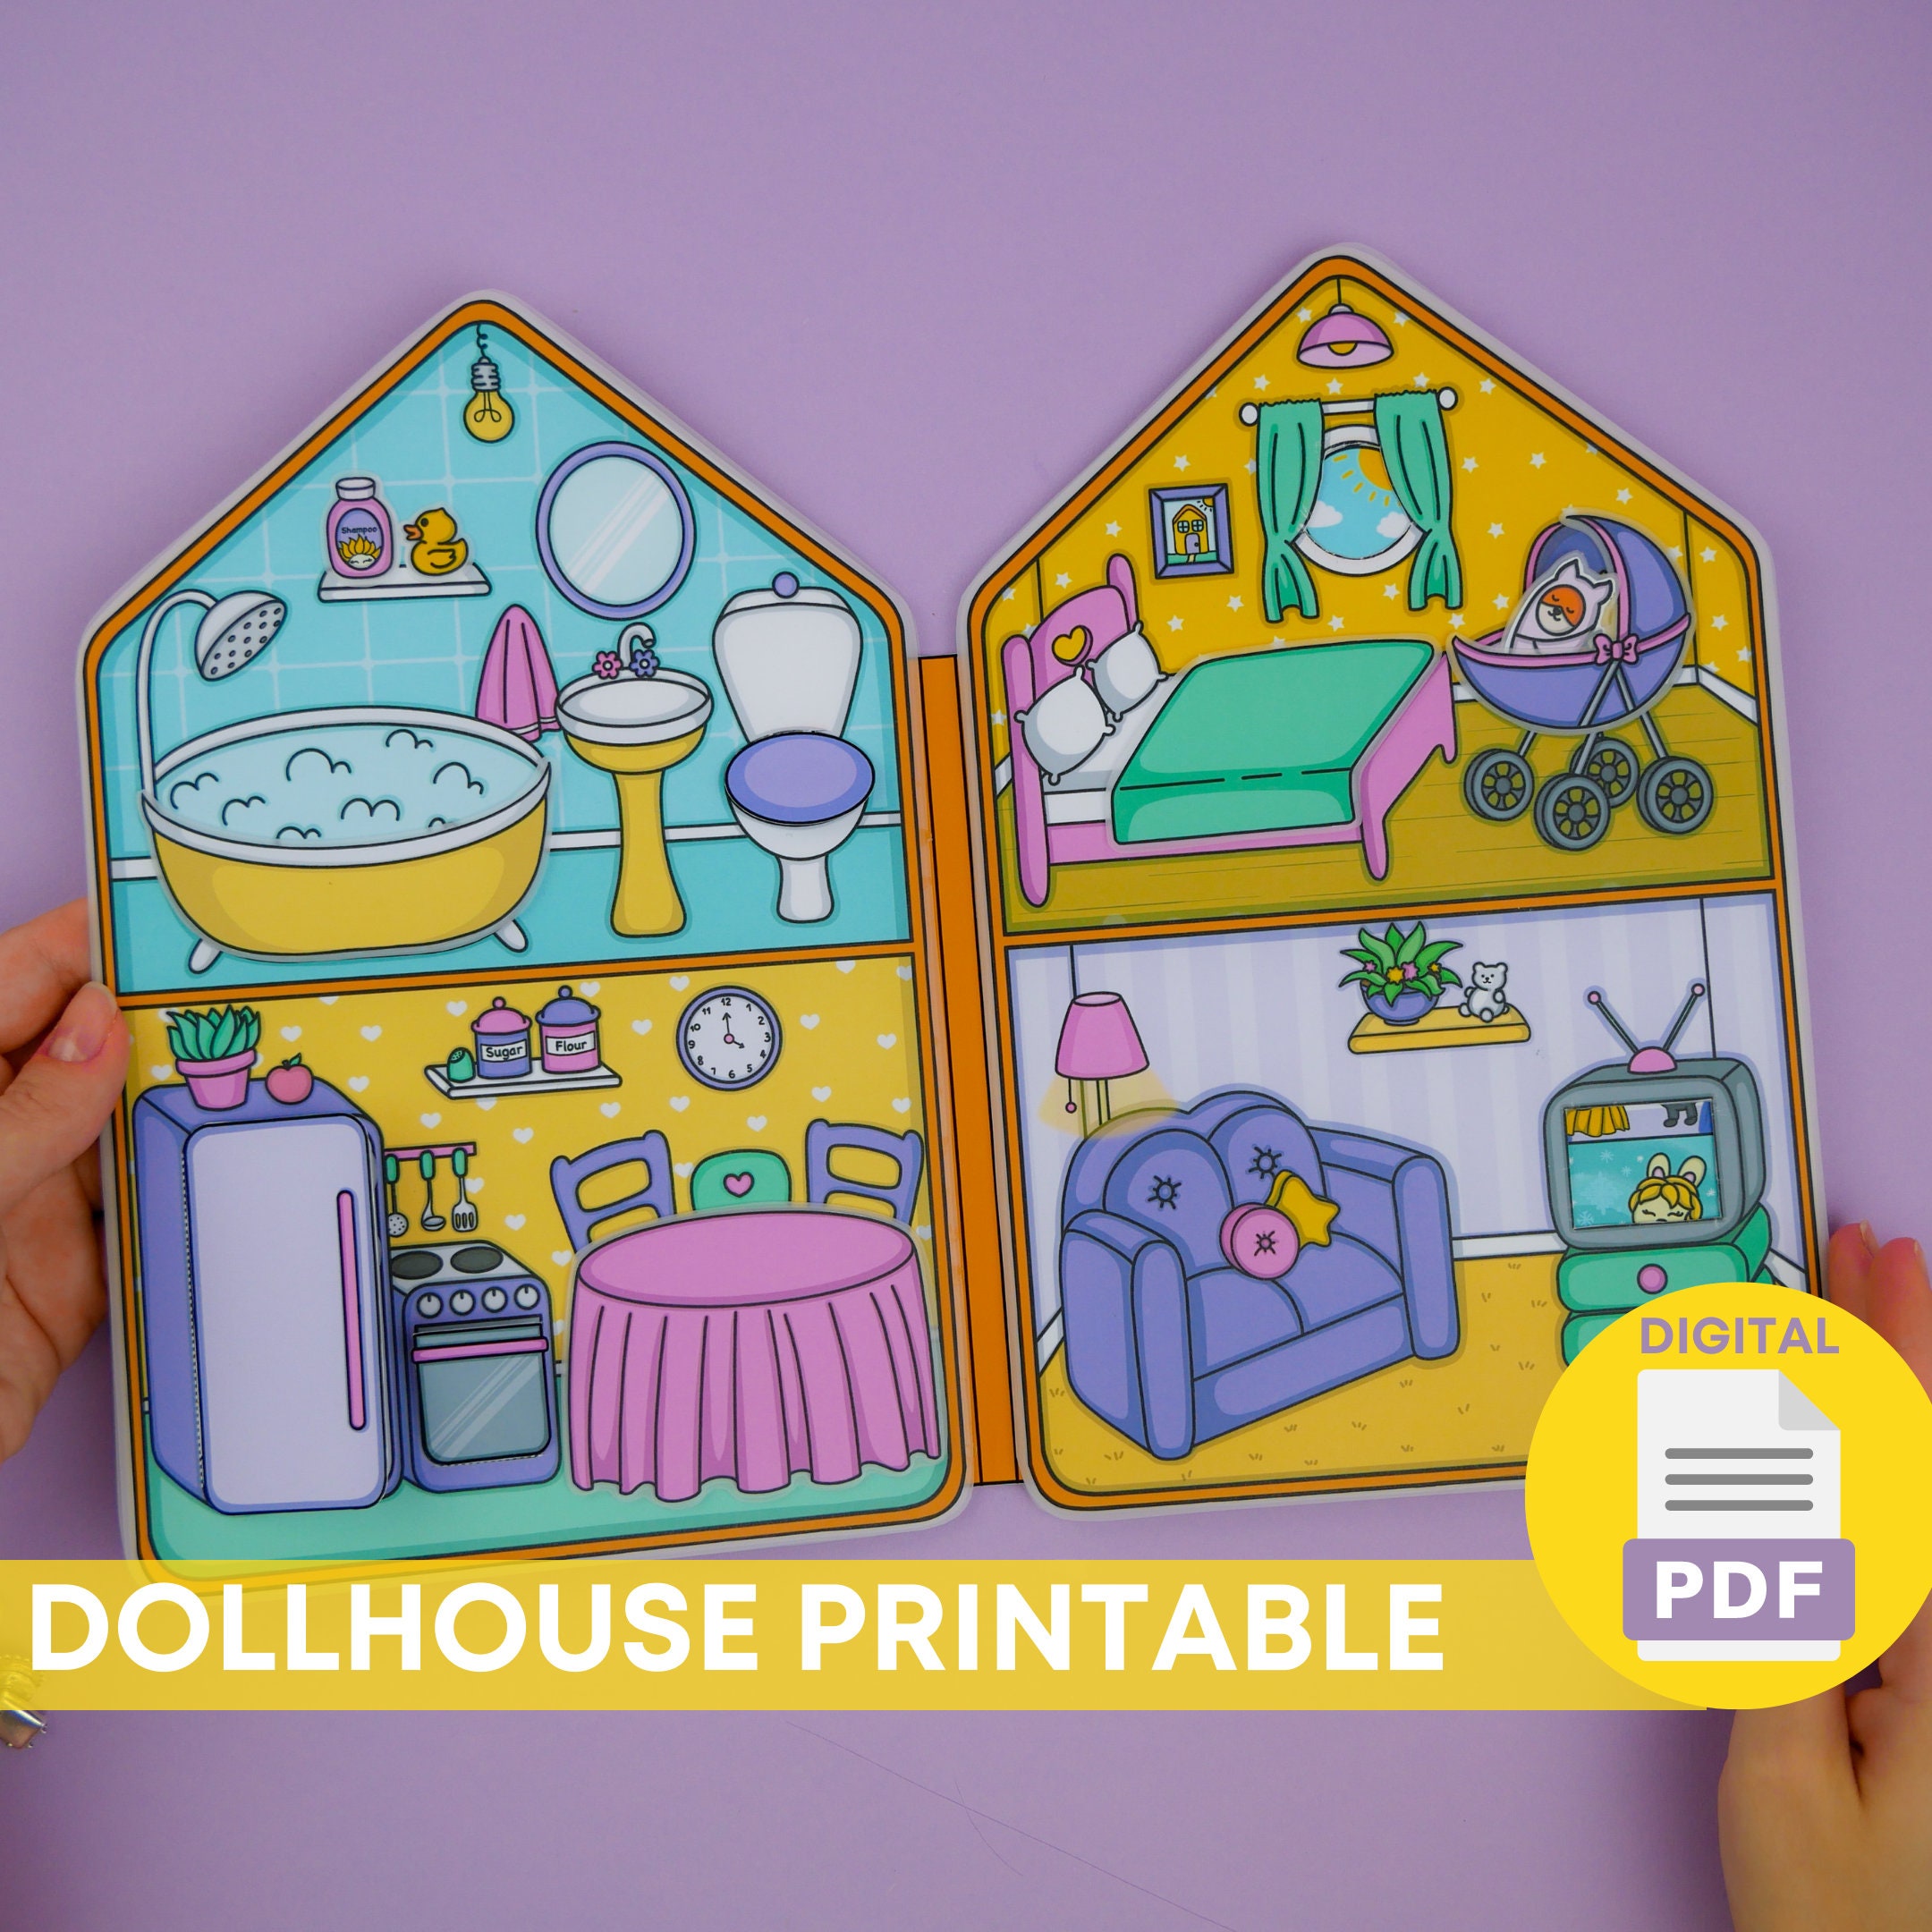 Busy book activities printable activity book dollhouse book vacation games travel activity kit diy kits for kids holiday activities